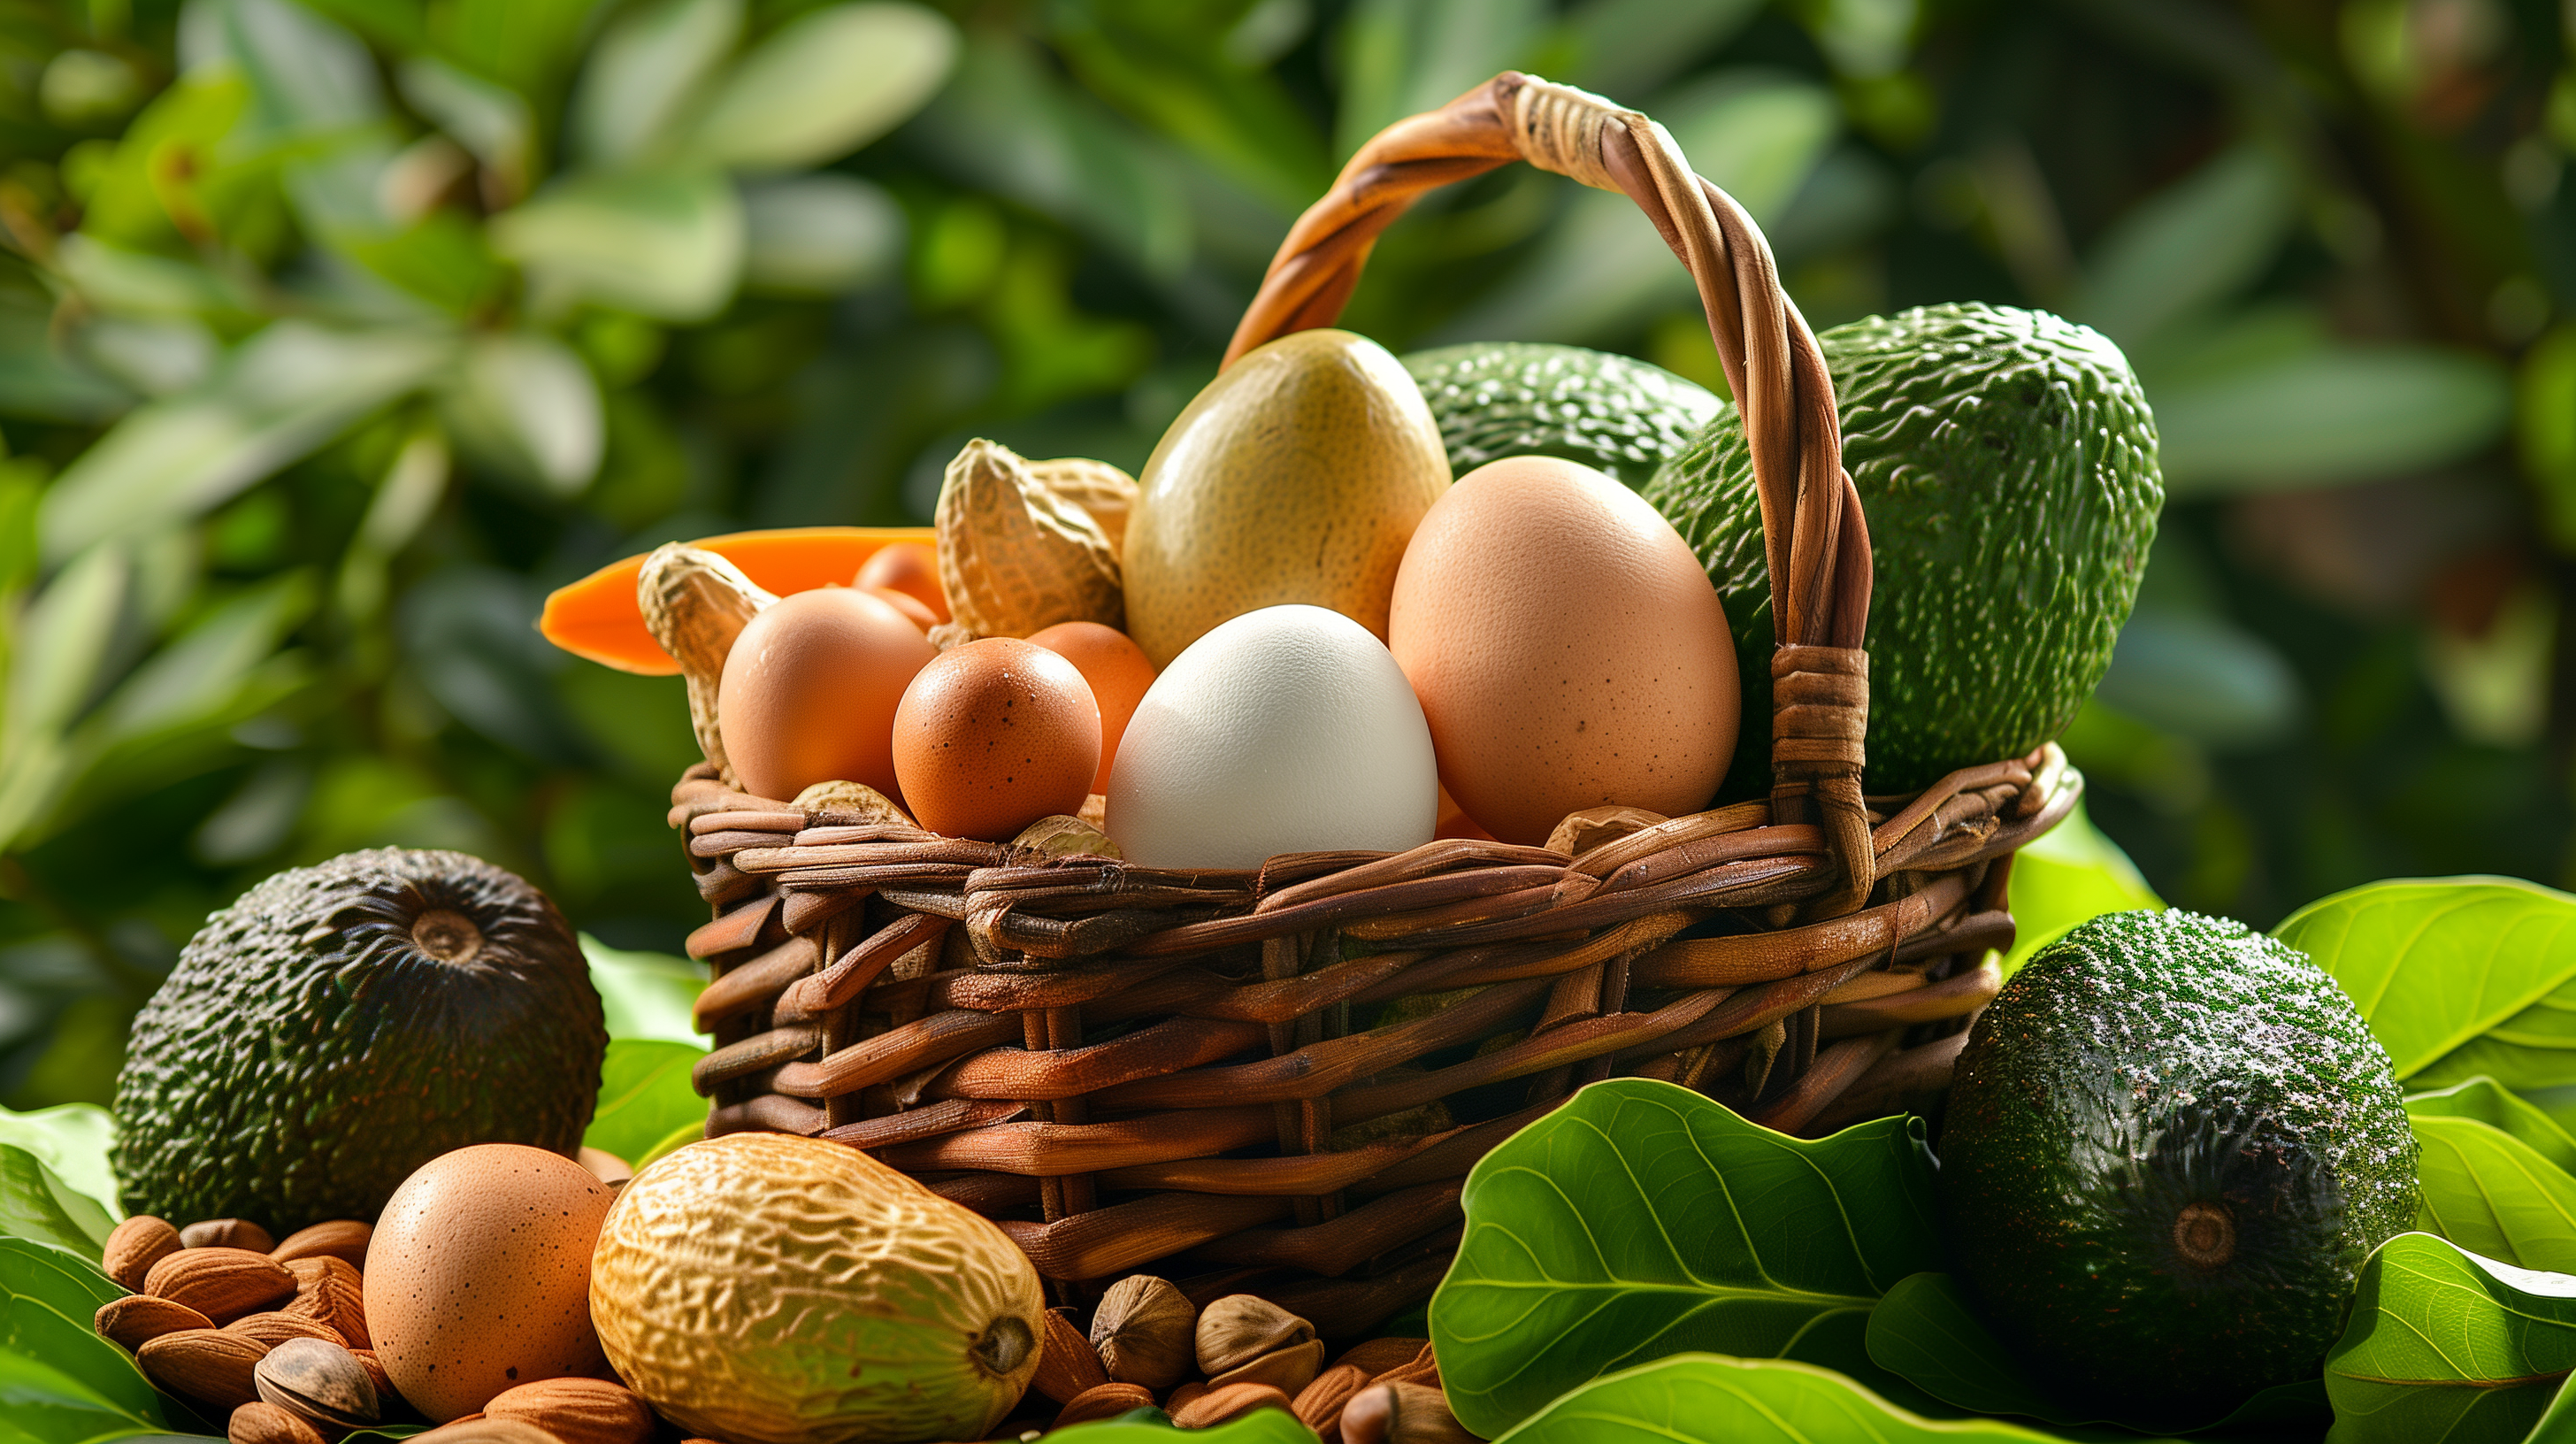 overflowing basket of natural foods rich in biotin and other hair growth vitamins, like eggs, nuts, avocados, and sweet potatoes